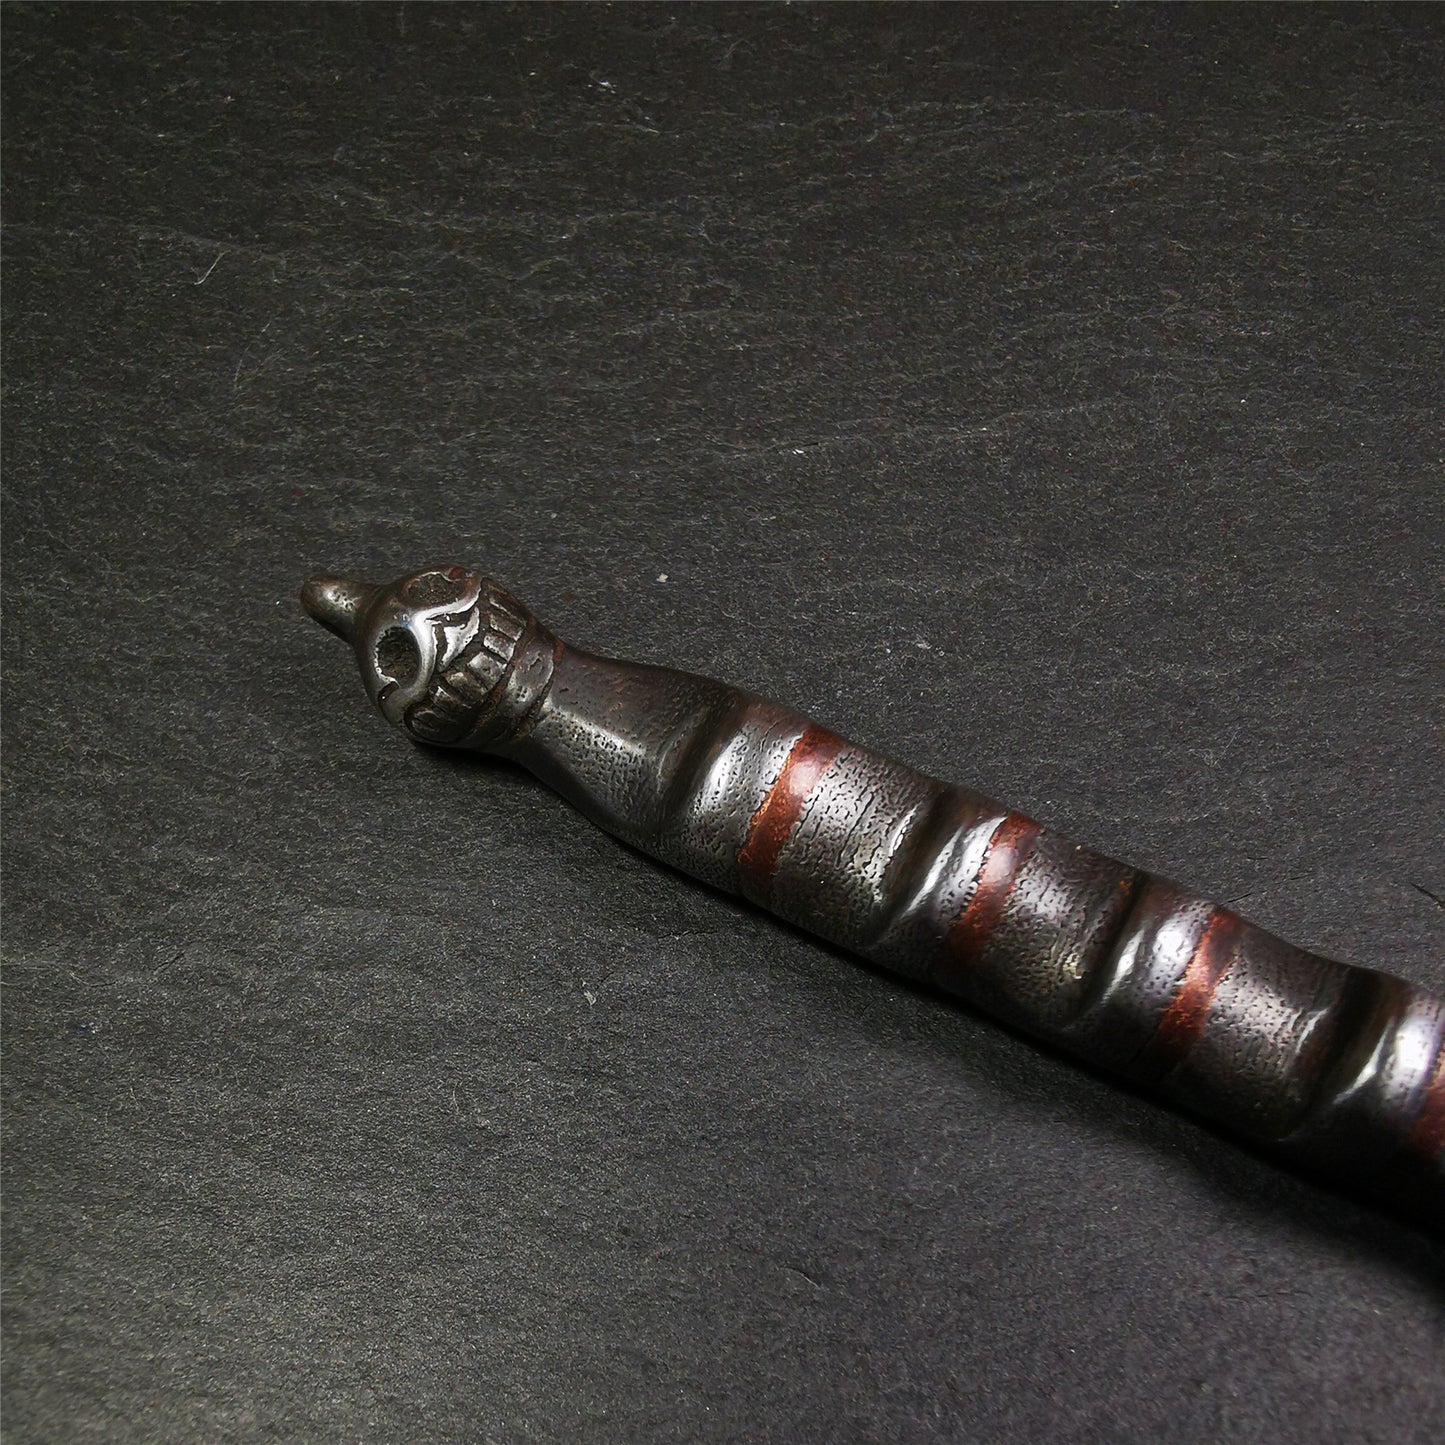 This unique Ladder pendant is made by Tibetan craftsmen in Hepo Township, Baiyu County. It is made of cold iron and copper, black color,the shape is Tibetan Ladder of Heaven,a skull on the top,length is 11cm / 4.33 inches.  The ladder of heaven represents that Tibetans can pass their wishes and blessings to their relatives in the sky, and reach the Paradise of Paradise or the Pure Land of Buddhism as soon as possible.